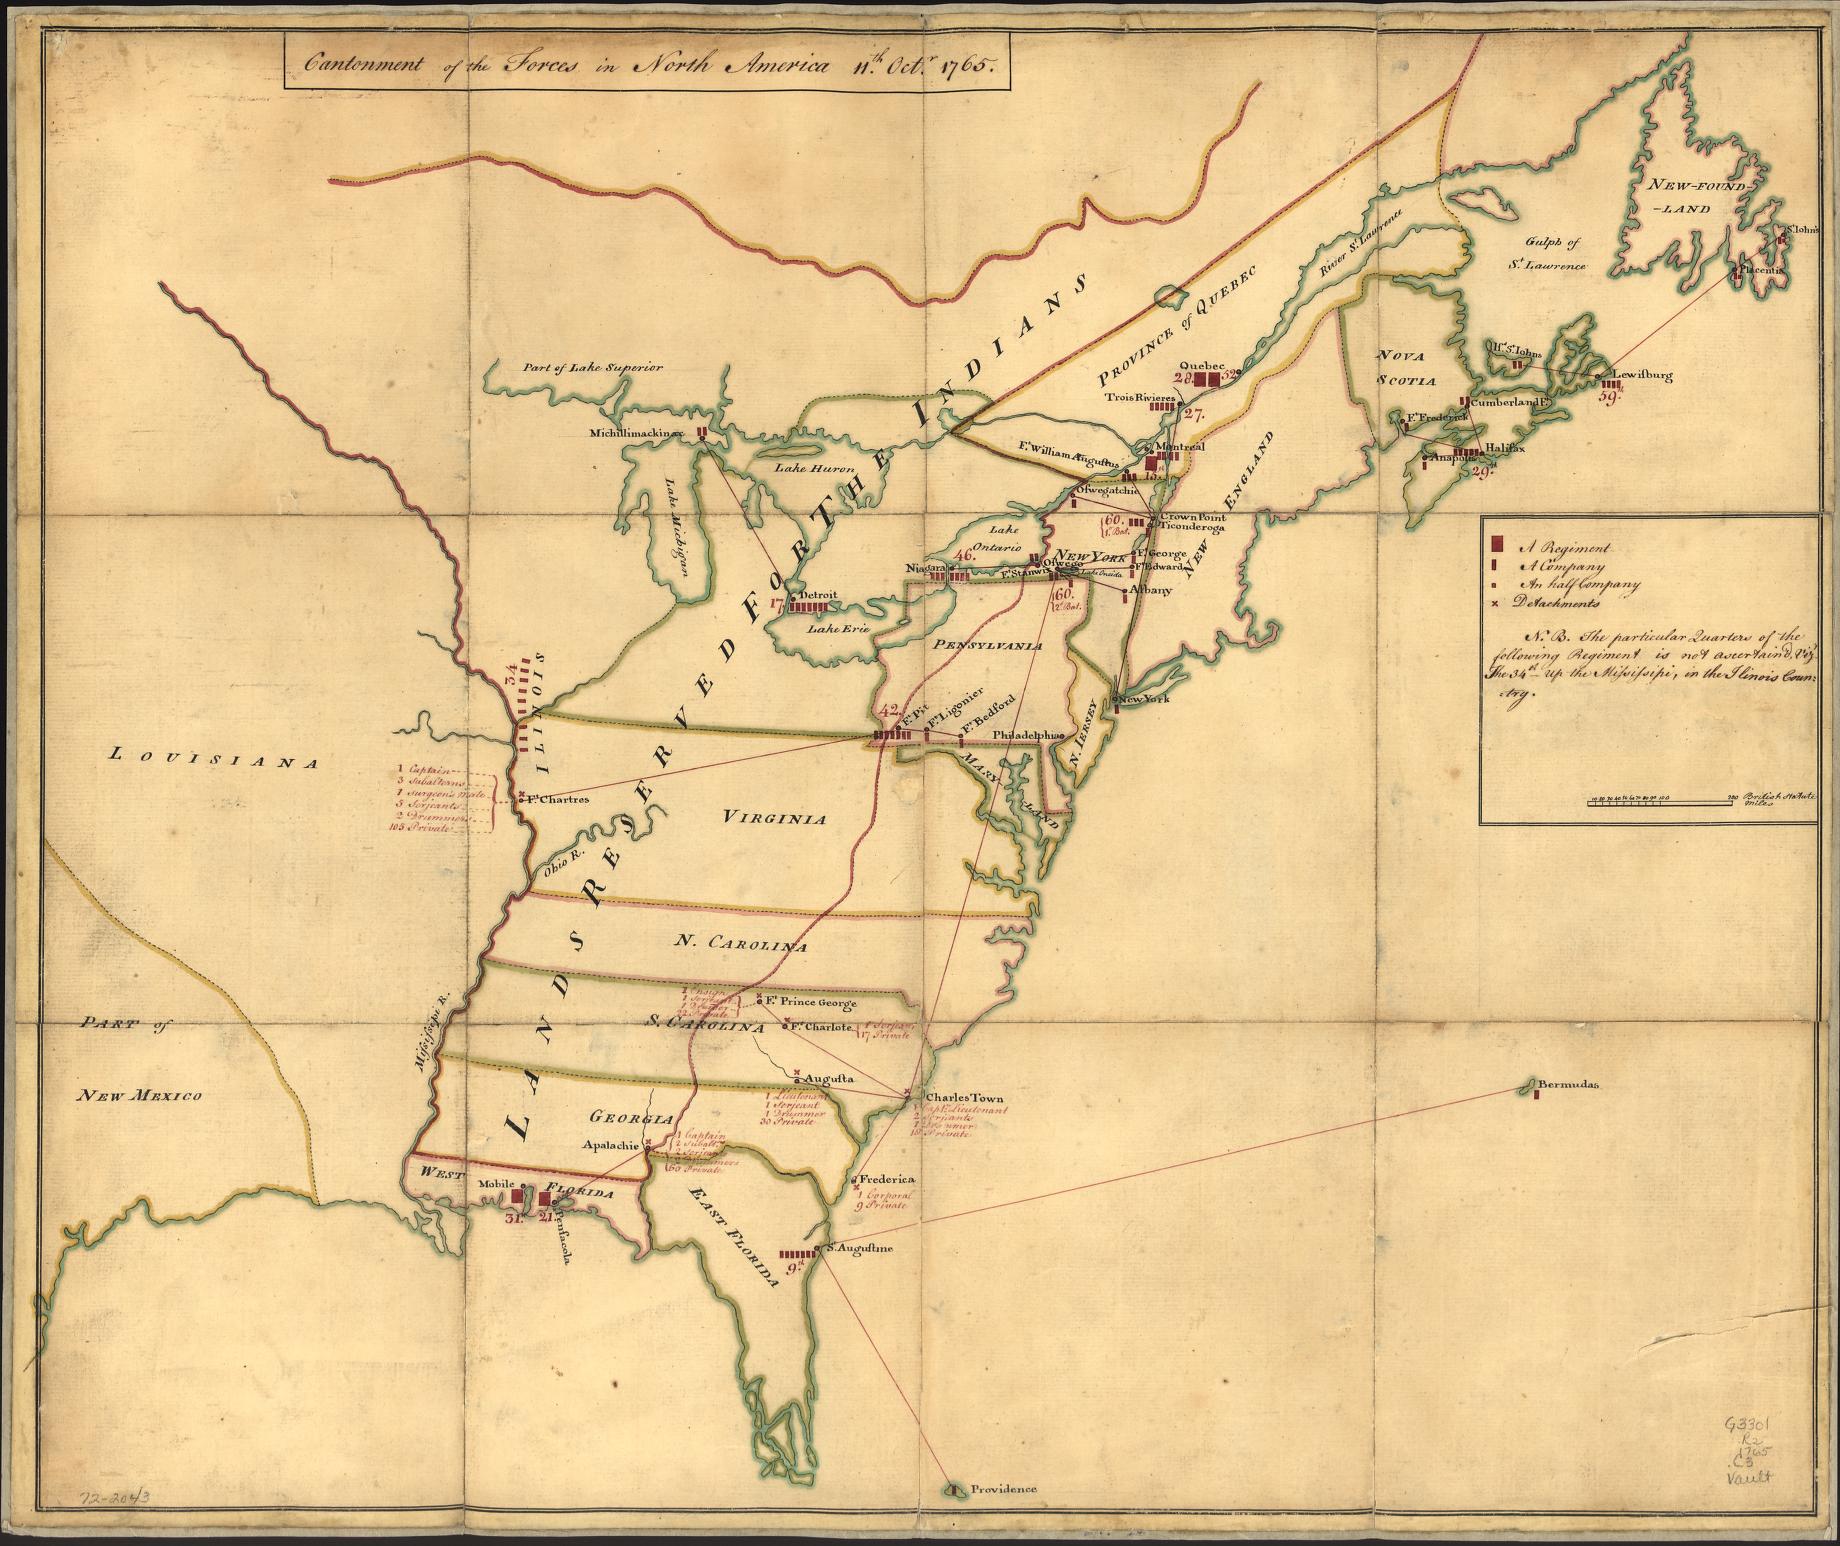 Detail from map Cantonment of the Forces in North America 11th October 1765